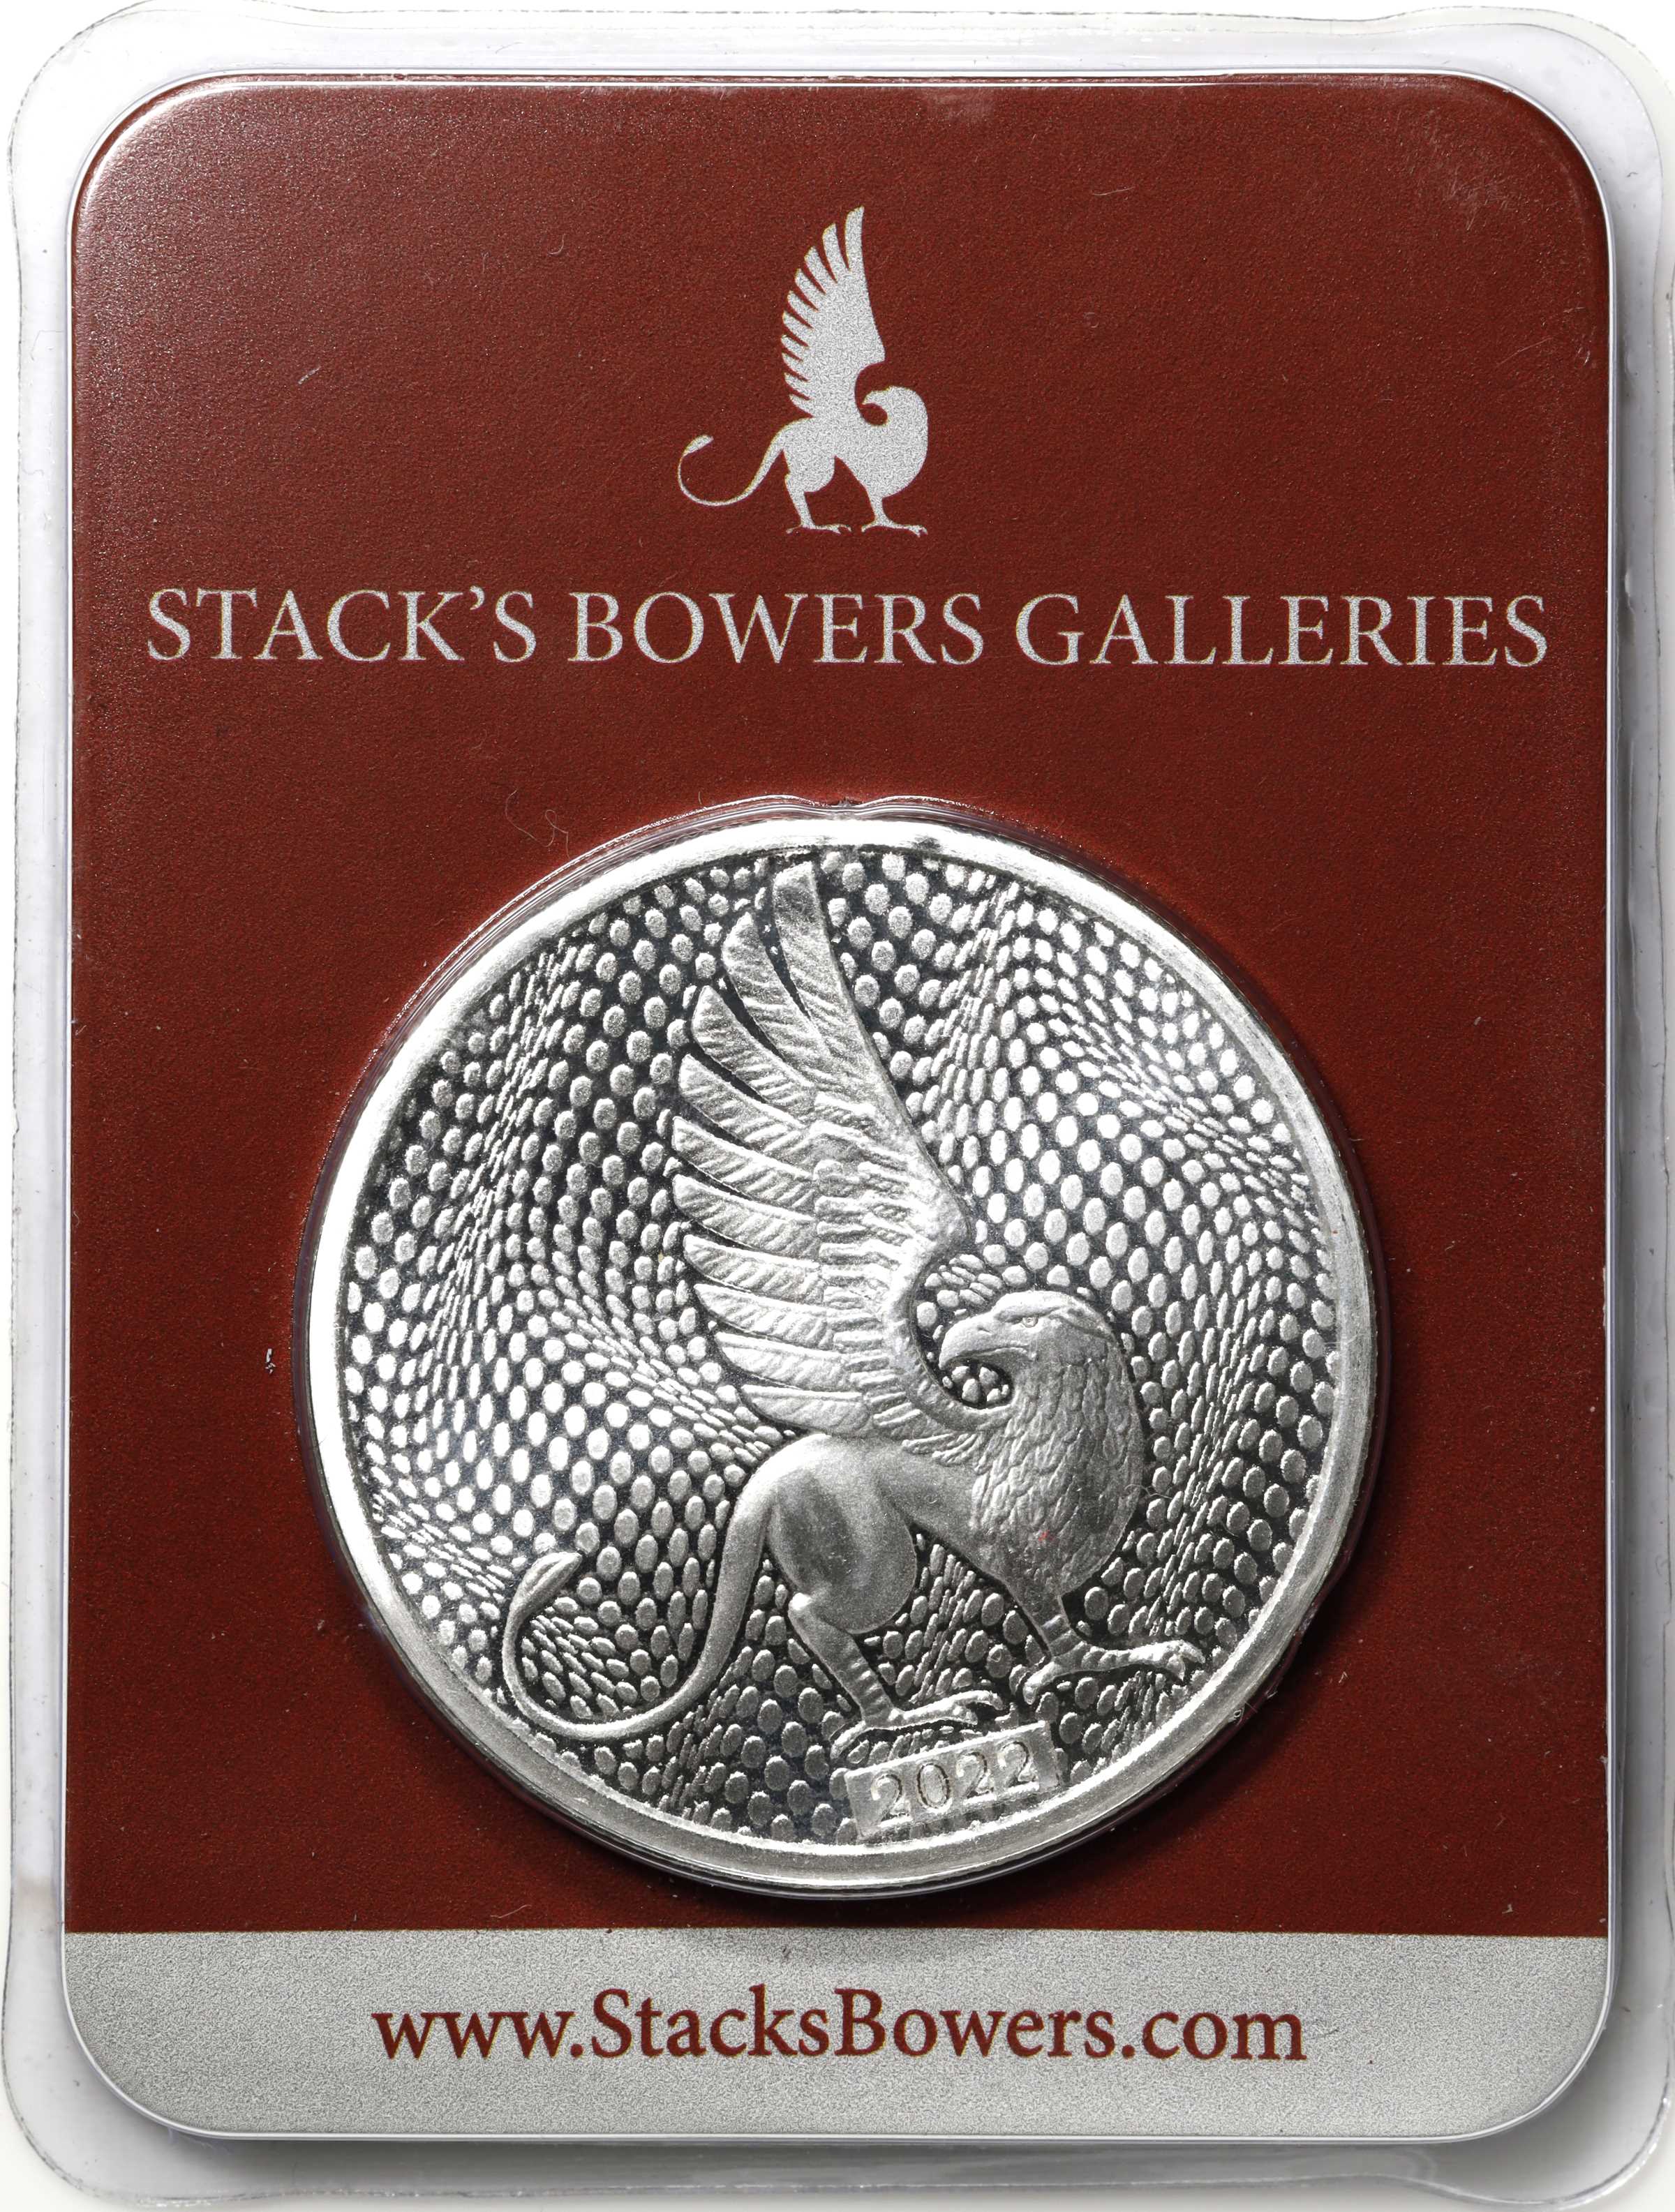 1 oz, 31.104 g ASW). Stack's Bowers Silver Round in Clamshell Case.